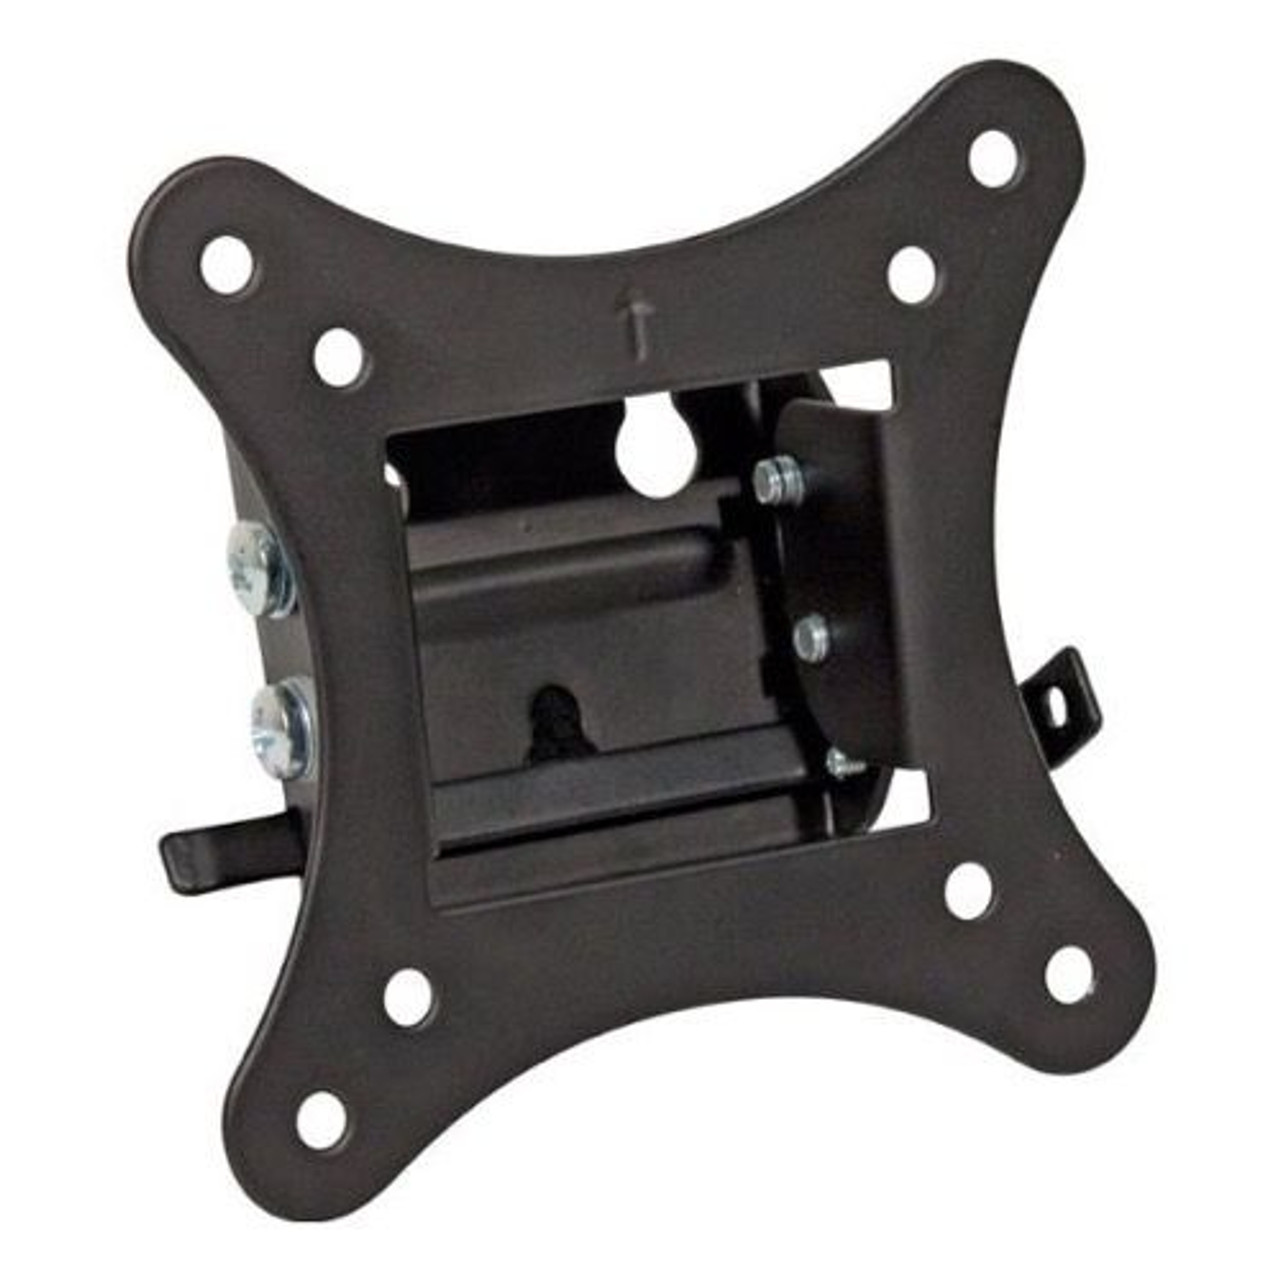 Sequence 720-200 Small Tilt TV Wall Mount for TVs From 10" to 24" 33 Lb Load Low Profile Tilt Panel by Steren